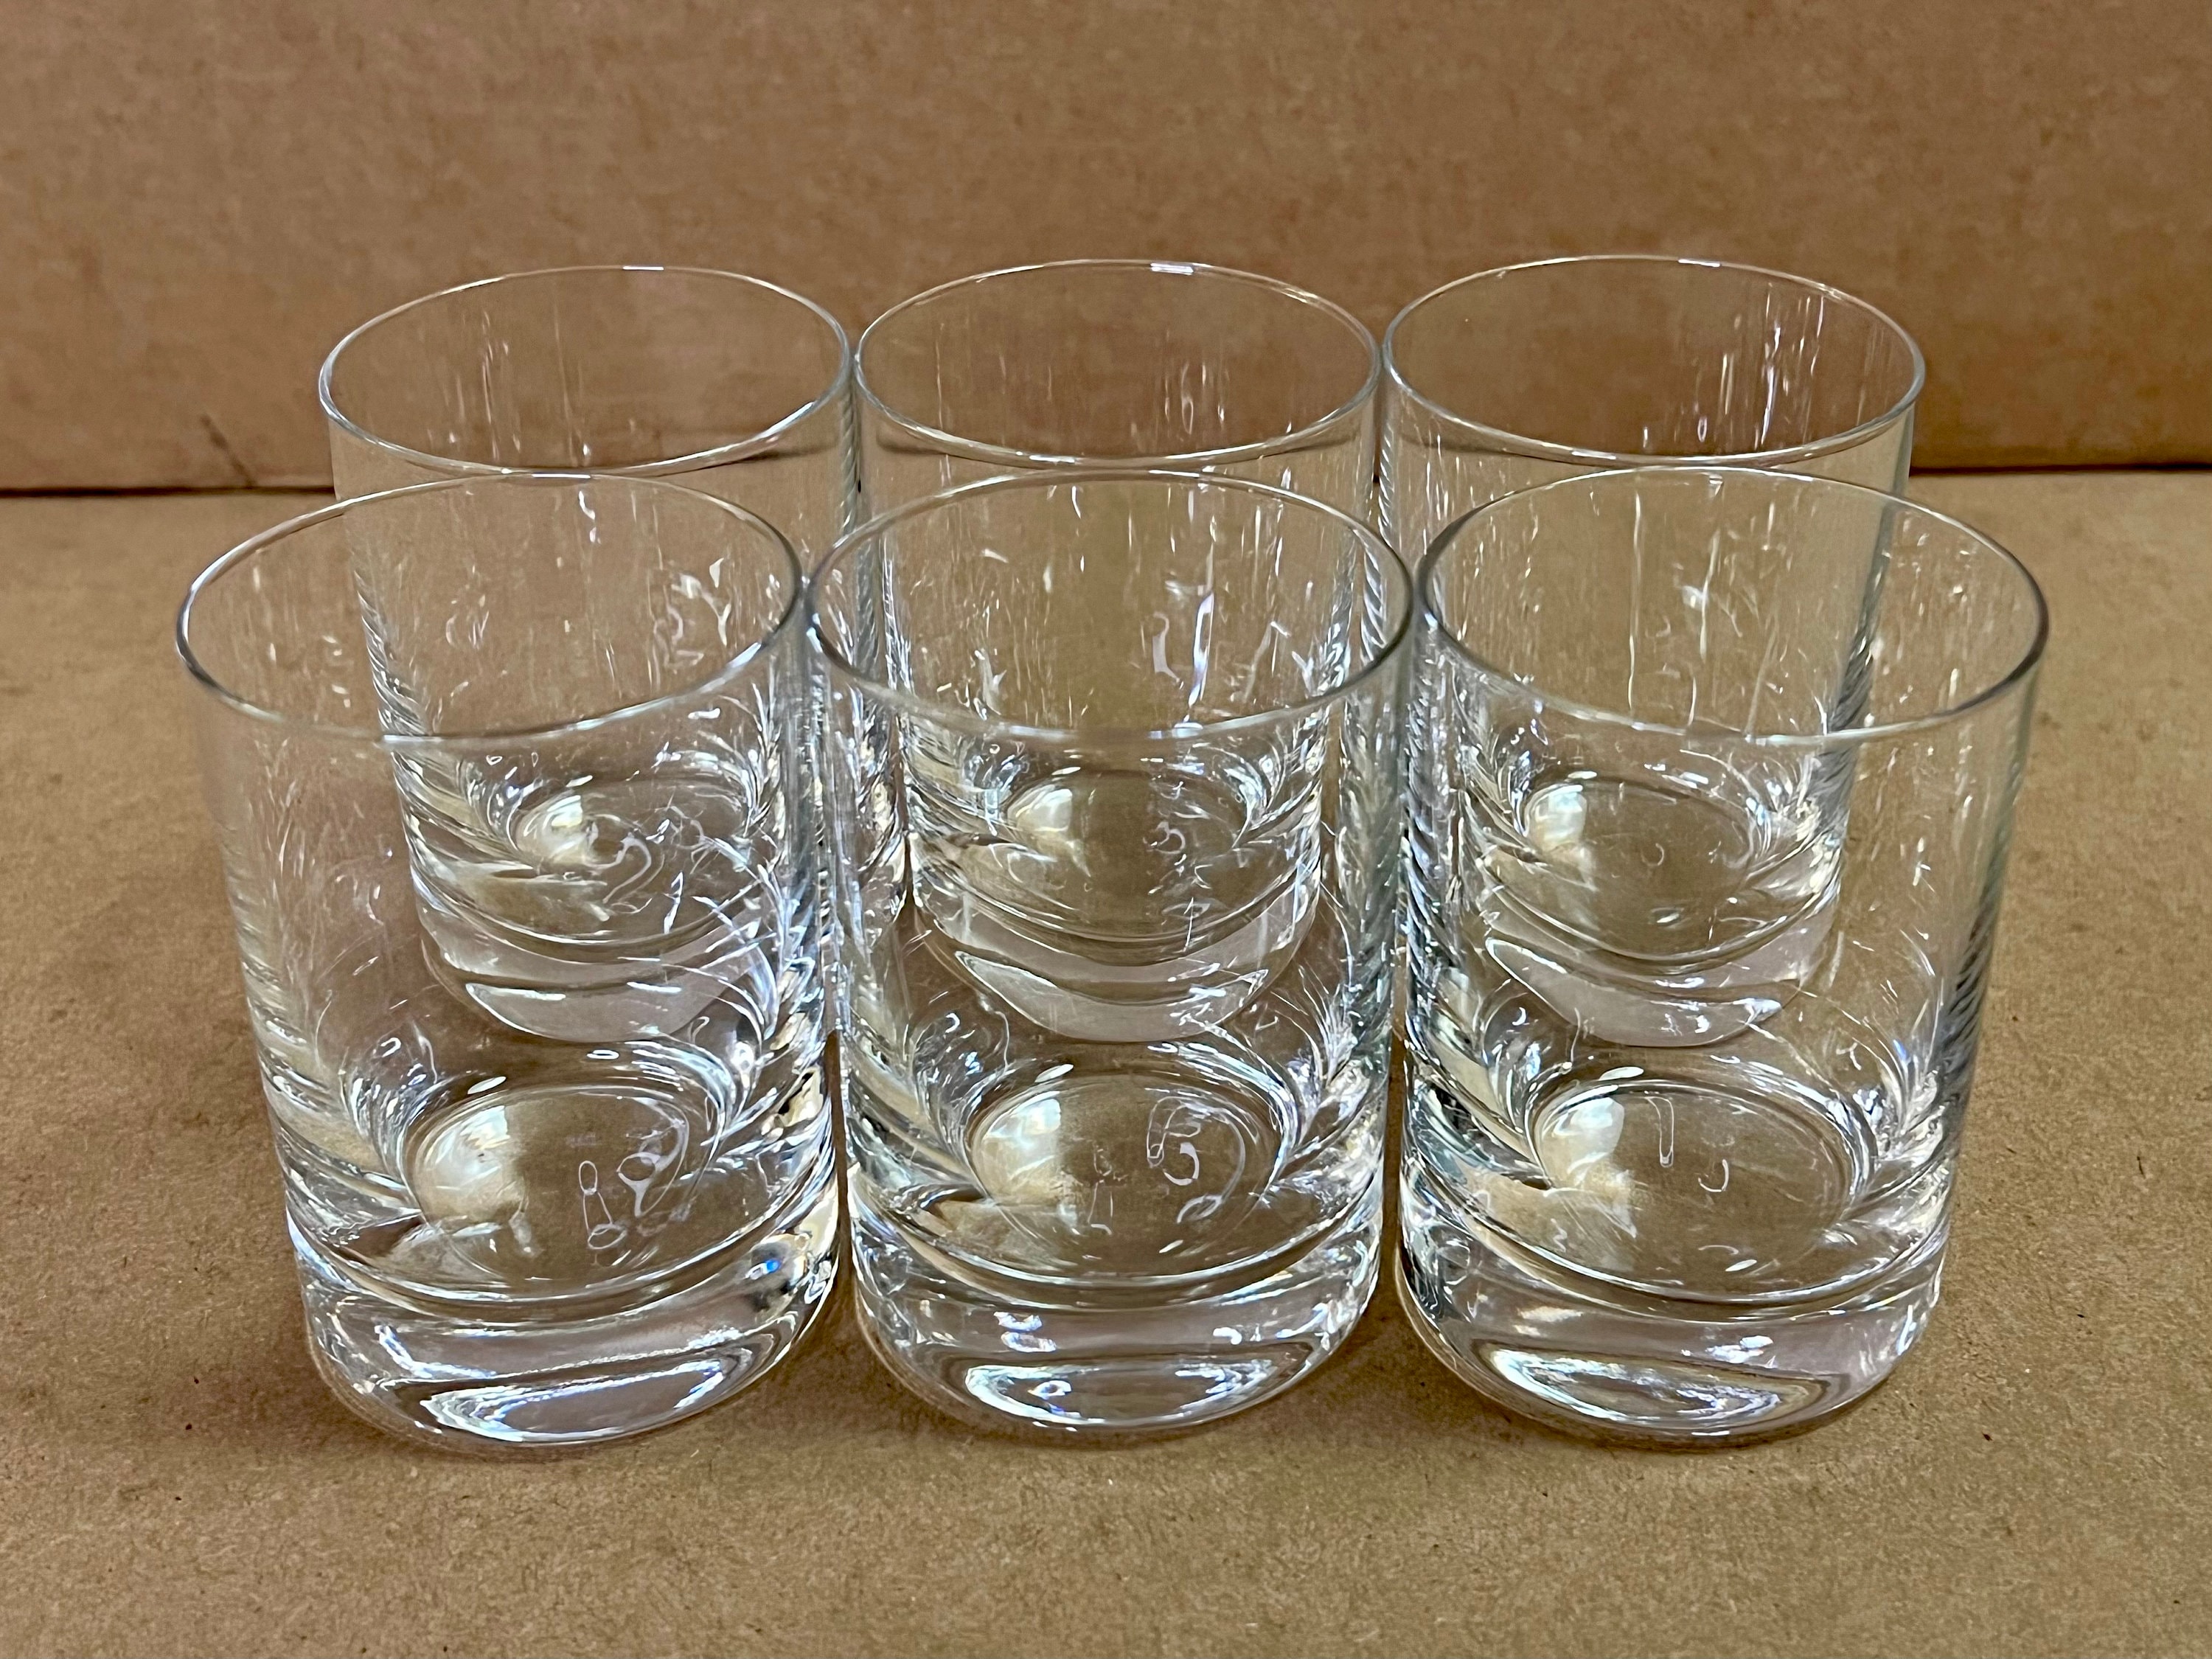 Small Drinking Glass 